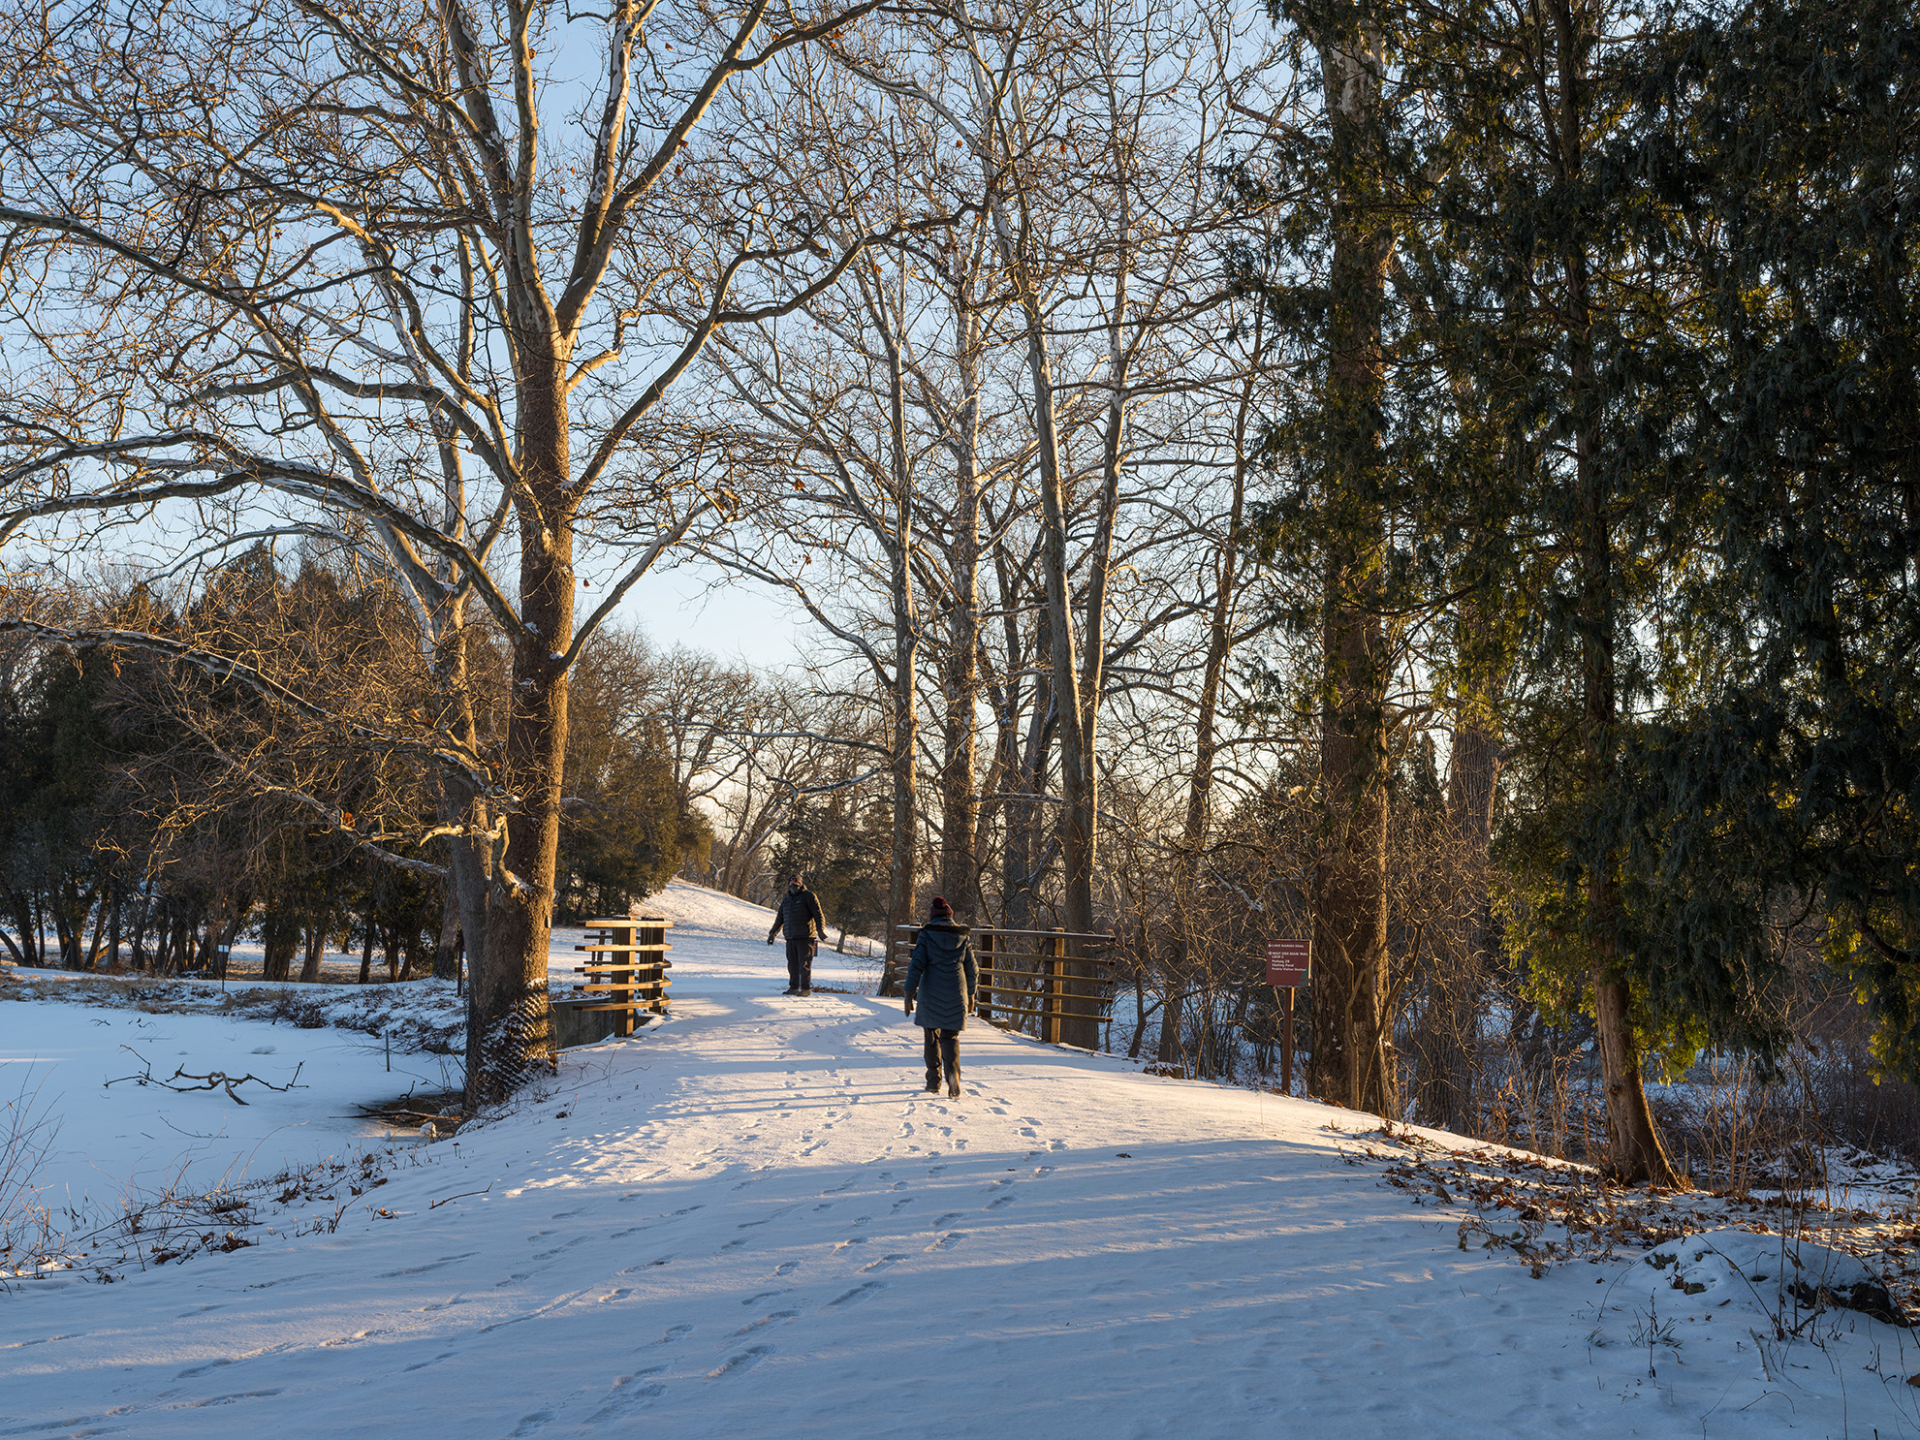 Guests hiking near Lake Marmo in winter.